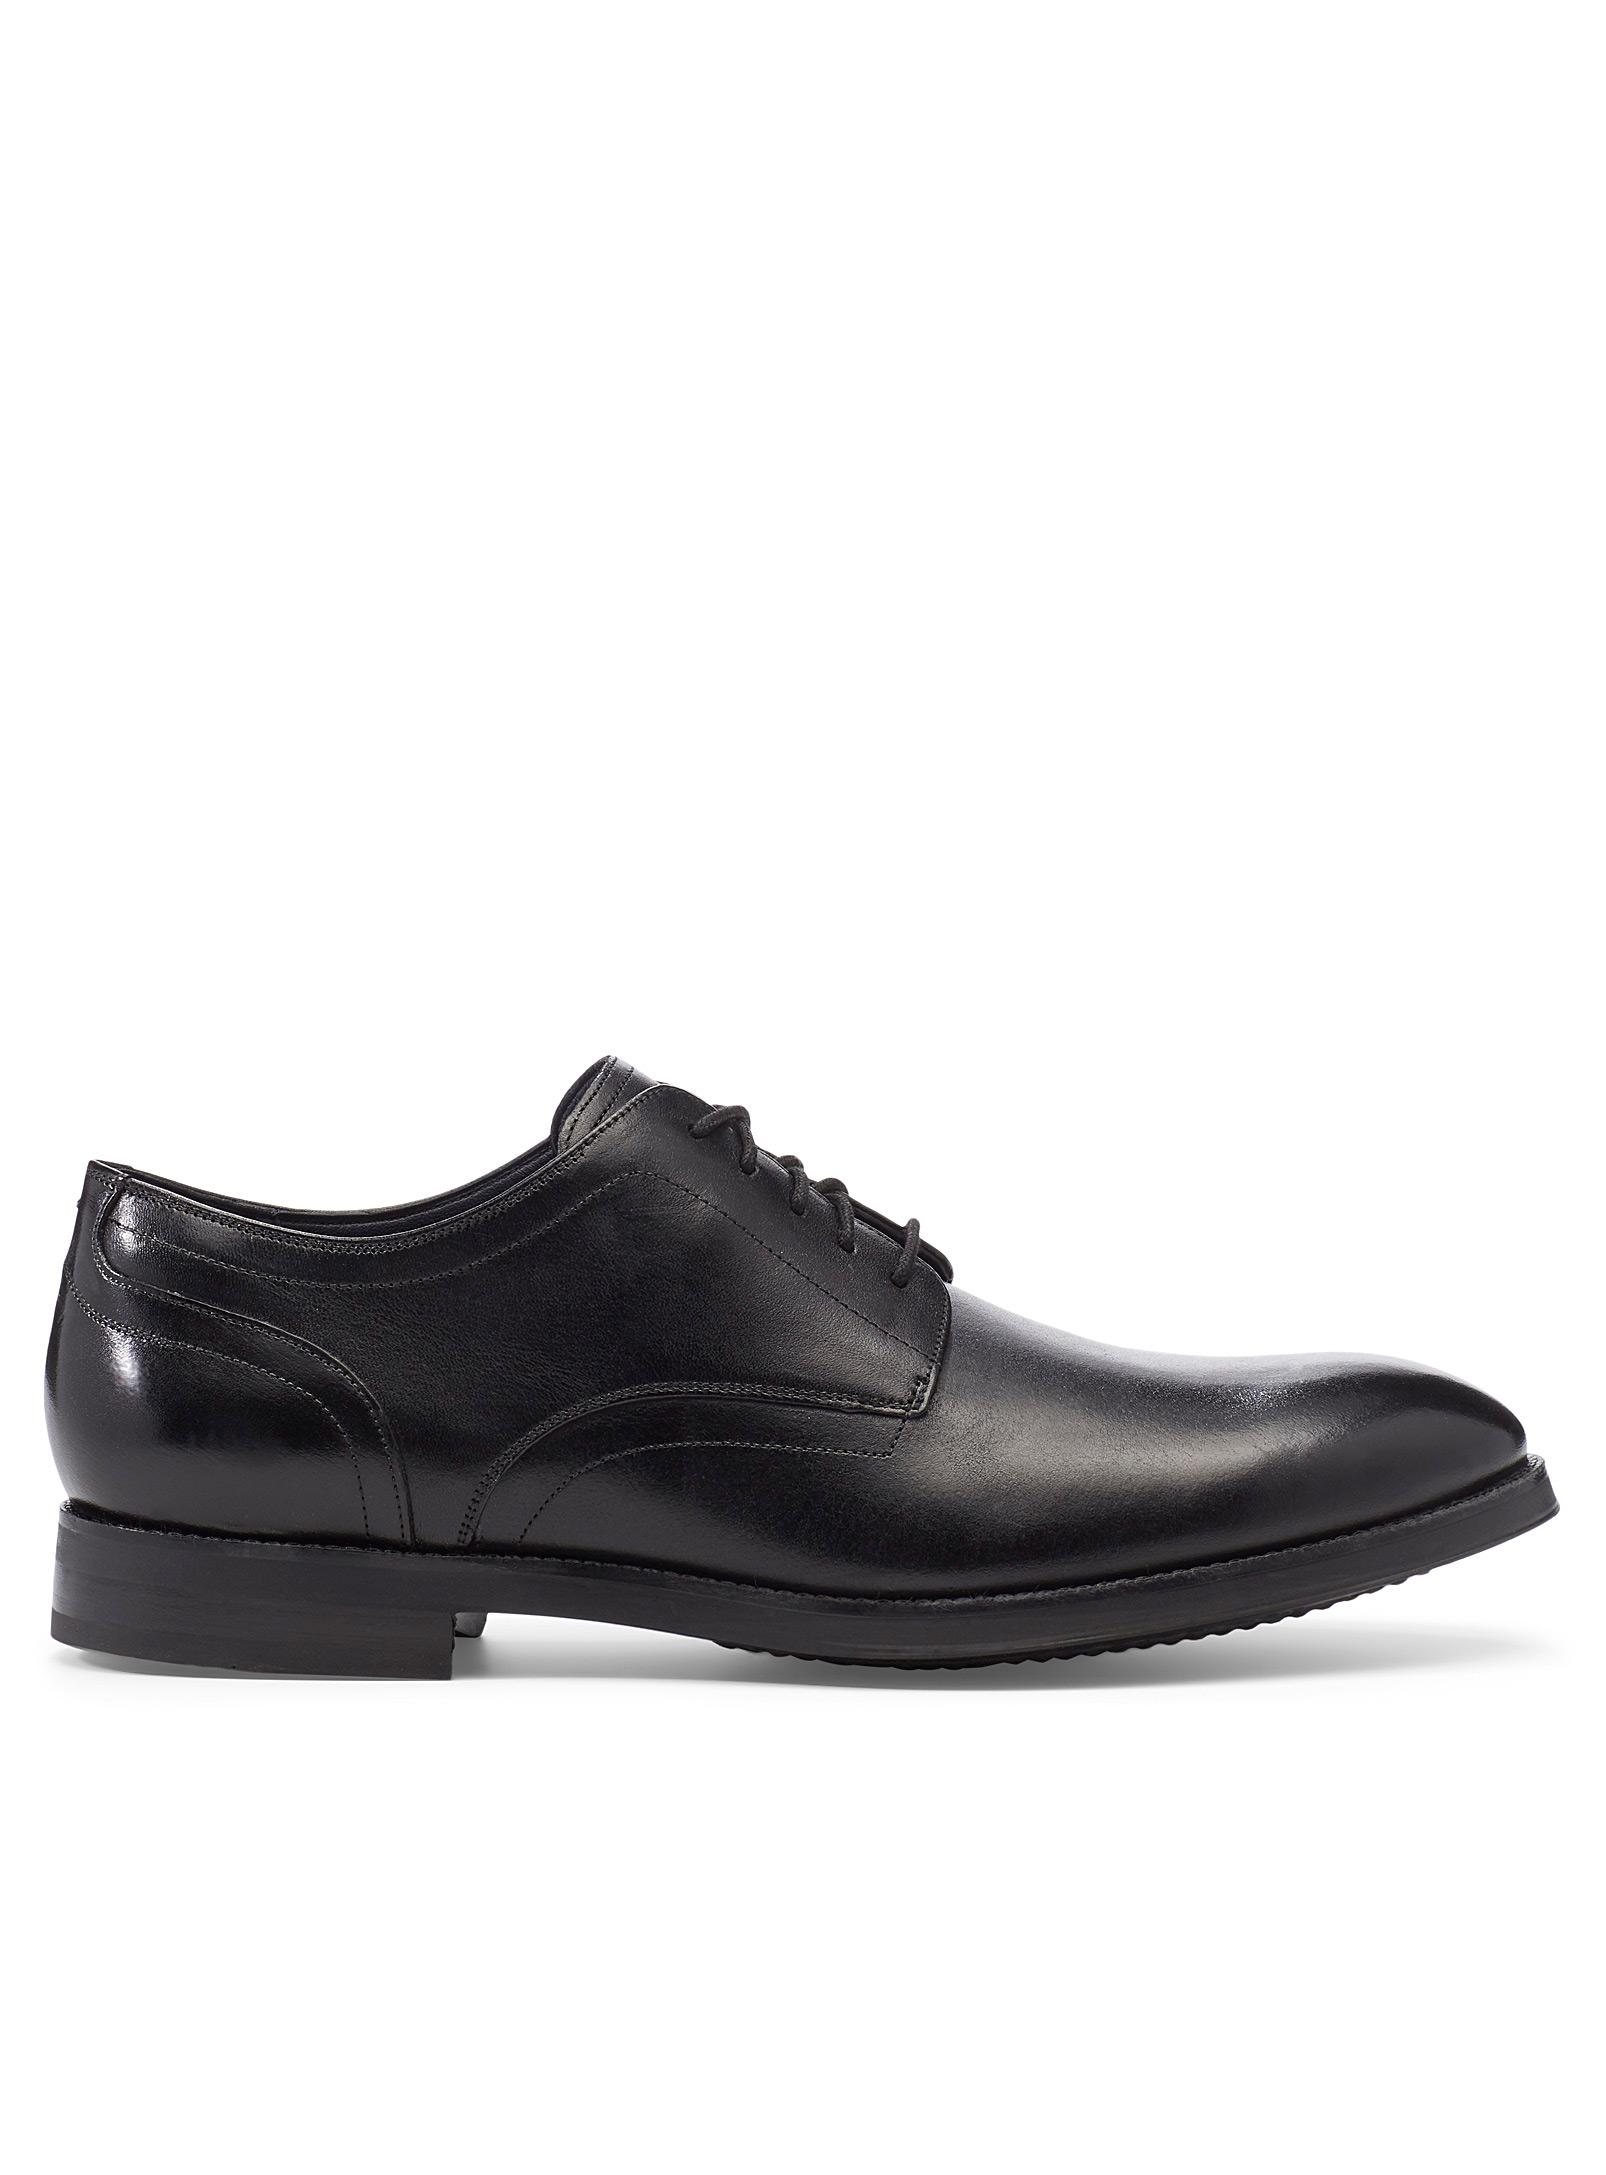 Cole Haan Leather Lewis Grand Derby Shoes in Black for Men - Lyst